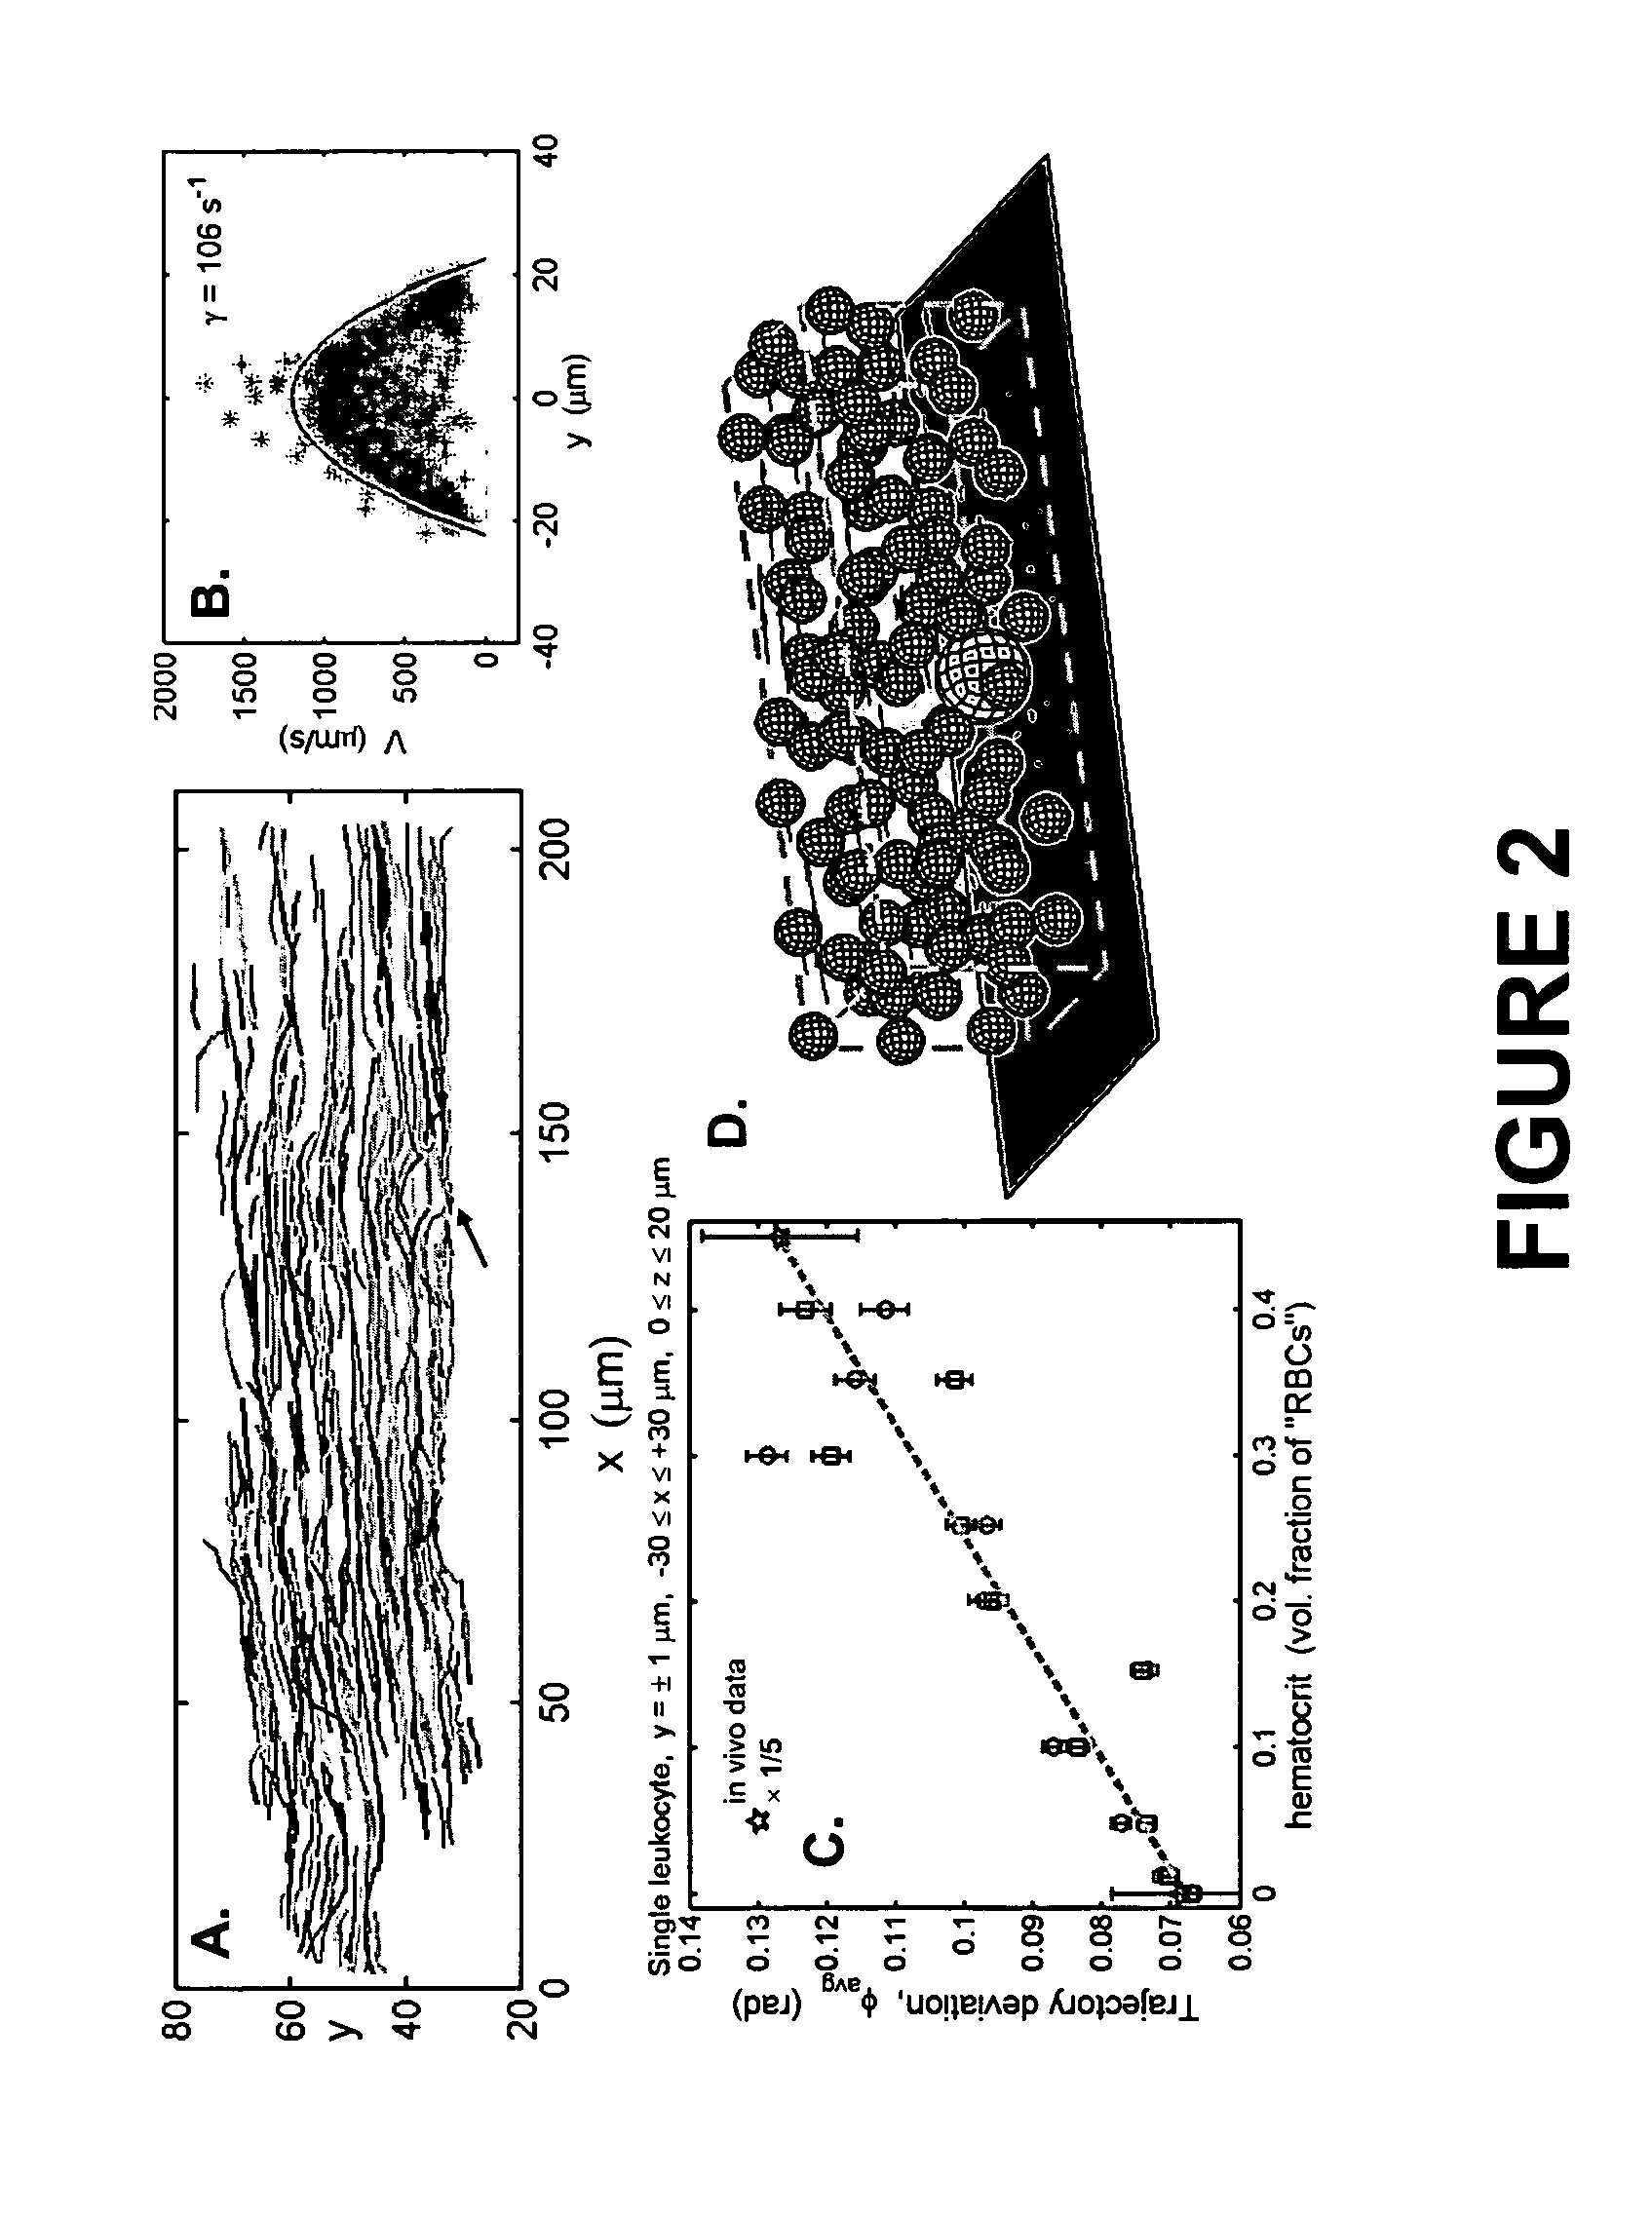 Continuous flow chamber device for separation, concentration, and/or purification of cells